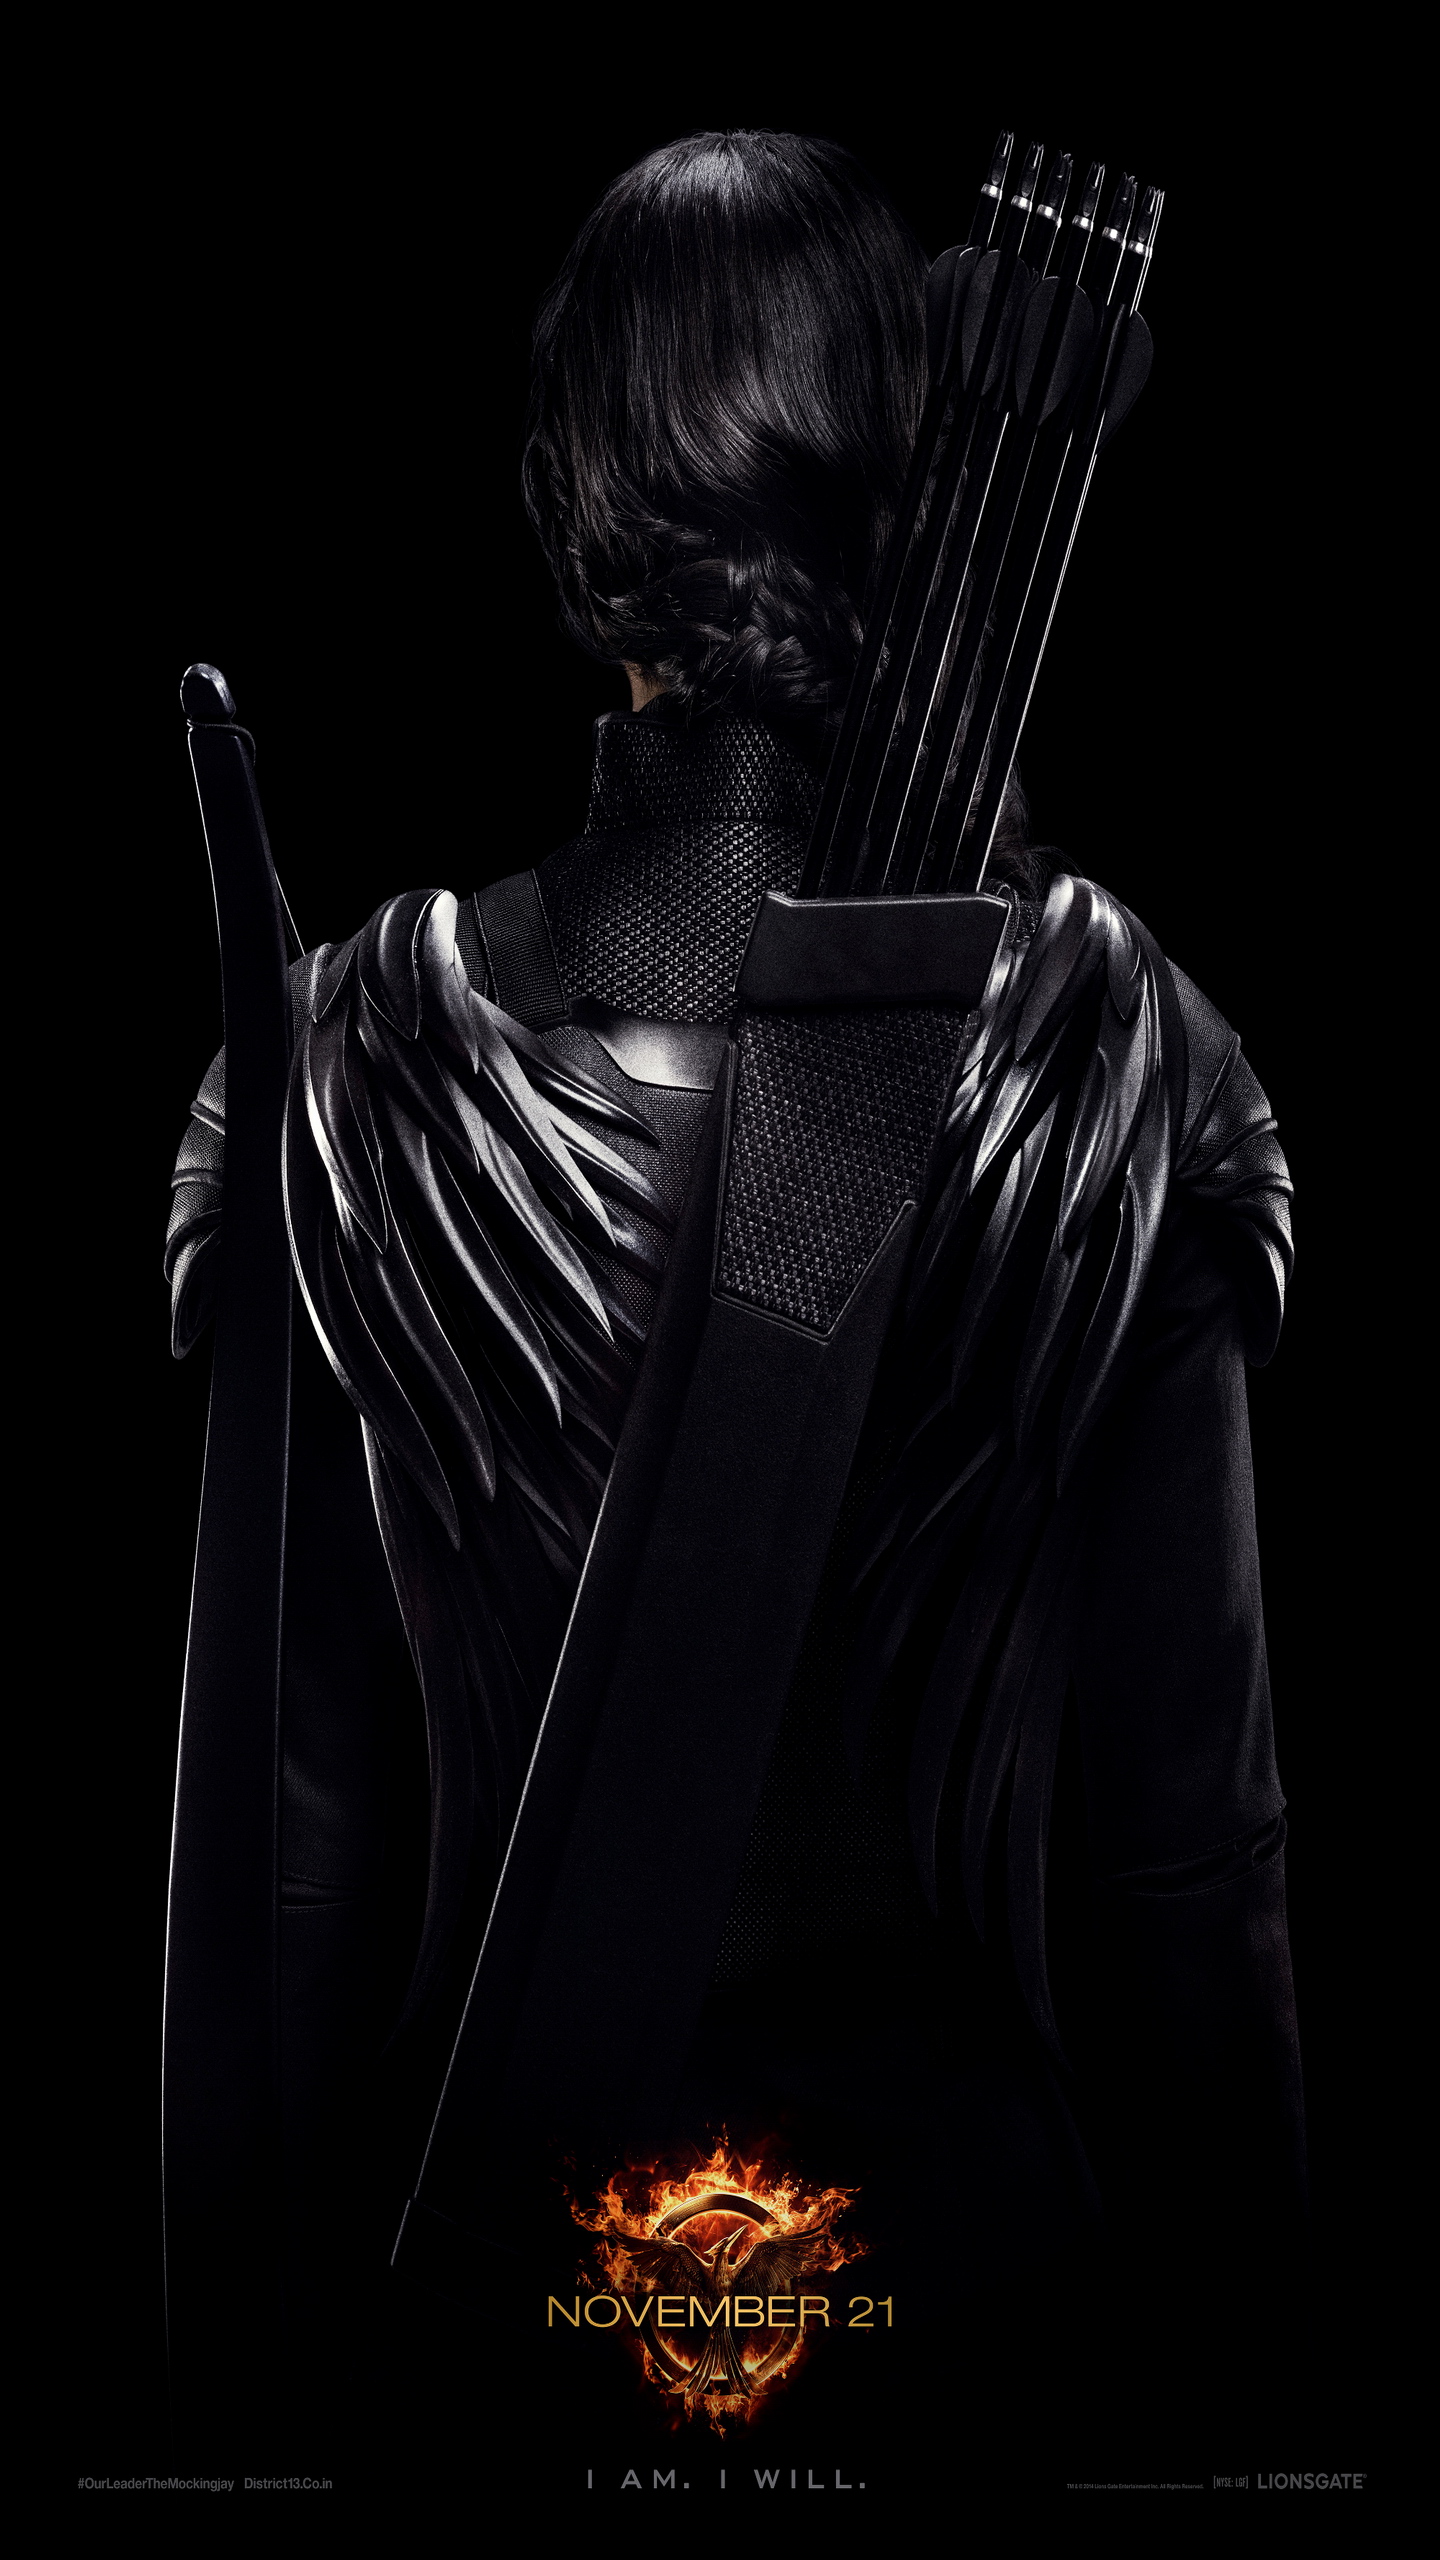 Mockingjay   Part 1 Galaxy Note 4 Wallpaper Archives   Wallpapers